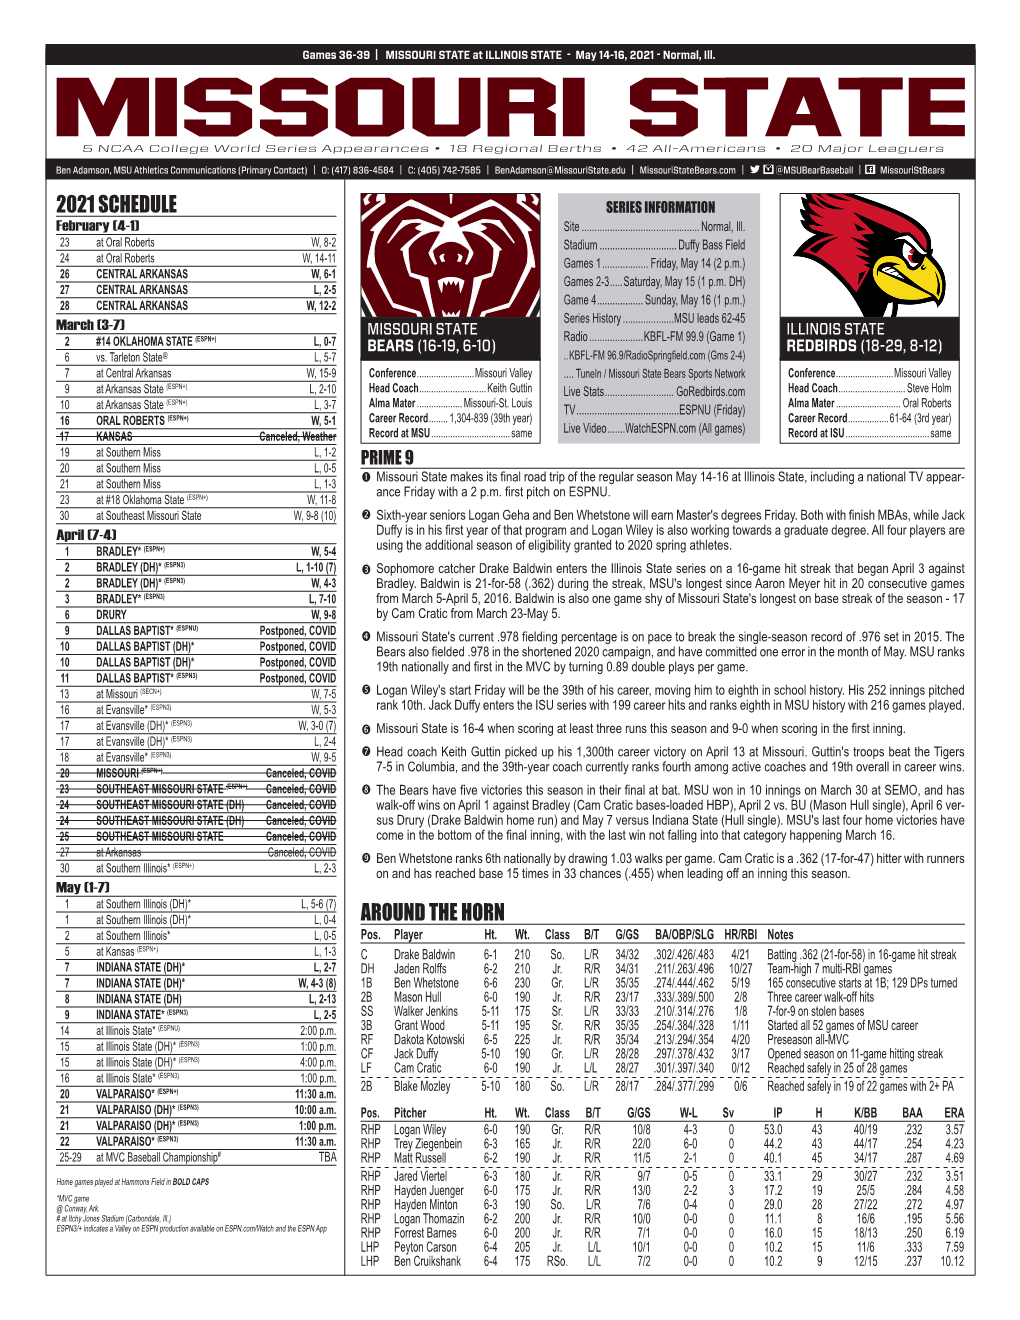 MISSOURI STATE at ILLINOIS STATE - May 14-16, 2021STATE - Normal, Ill